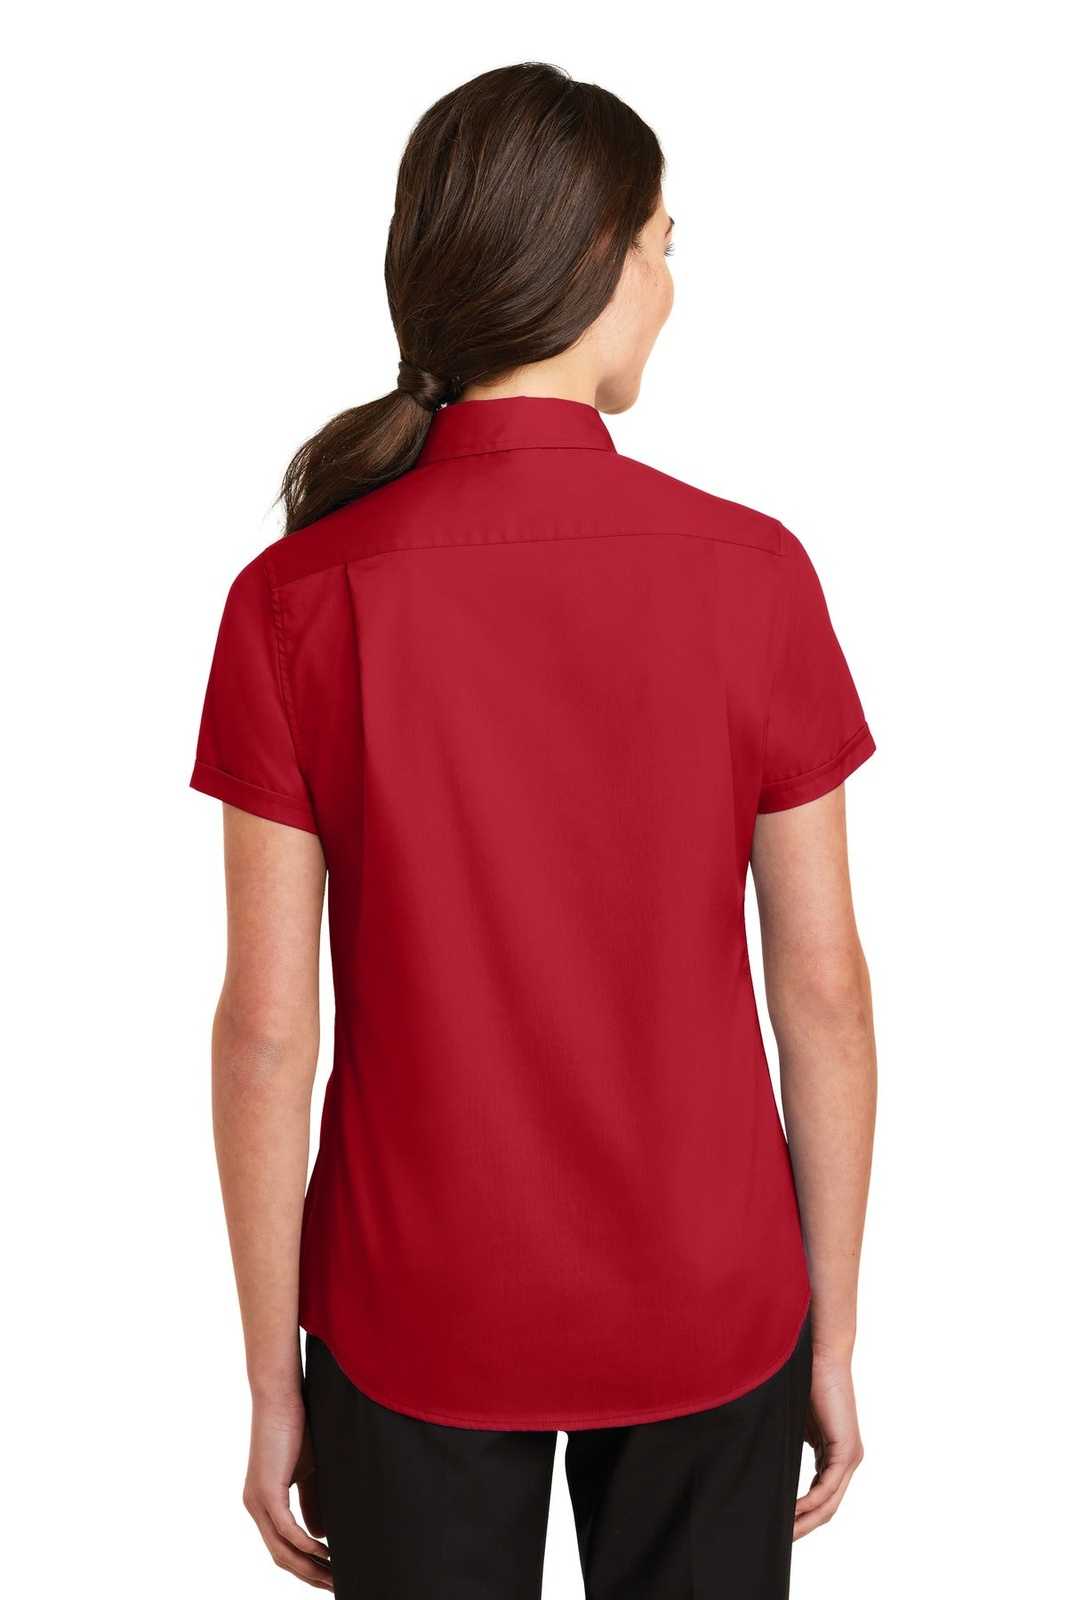 Port Authority L664 Ladies Short Sleeve Superpro Twill Shirt - Rich Red - HIT a Double - 1